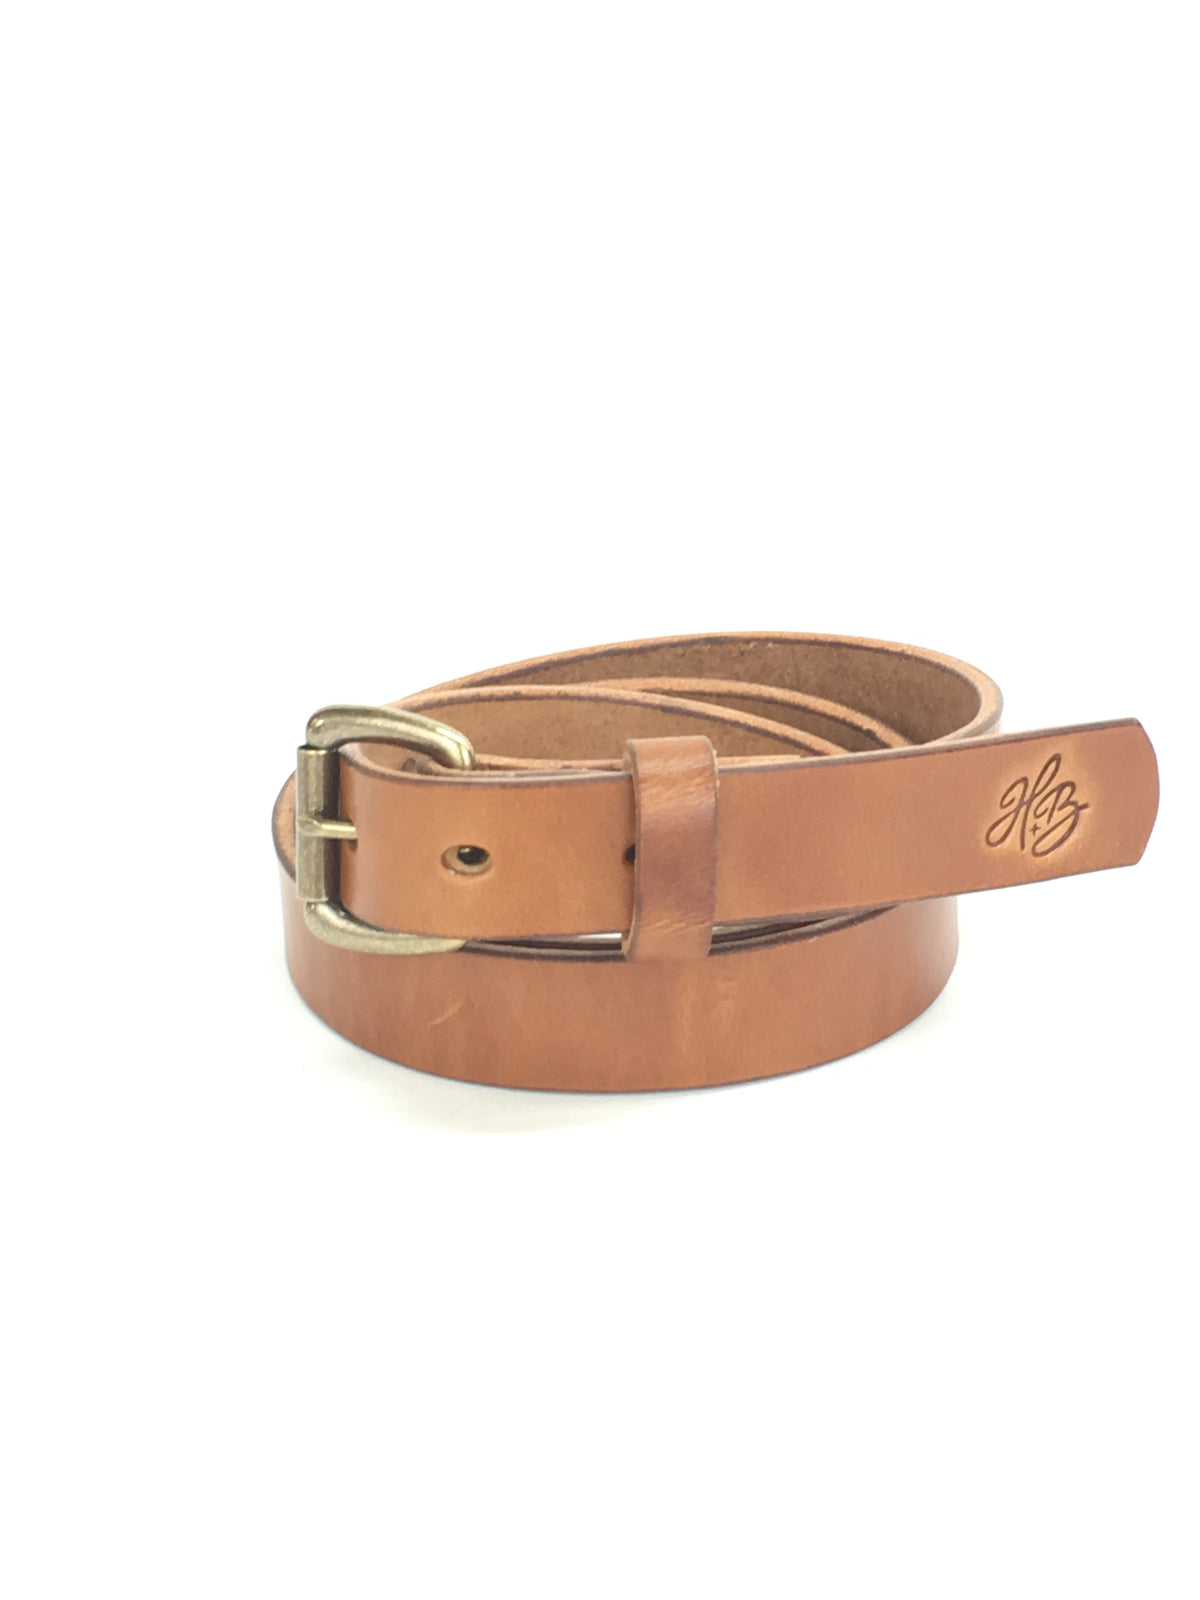 H+B FULL GRAIN LEATHER BELTS - BUCK BROWN LEATHER